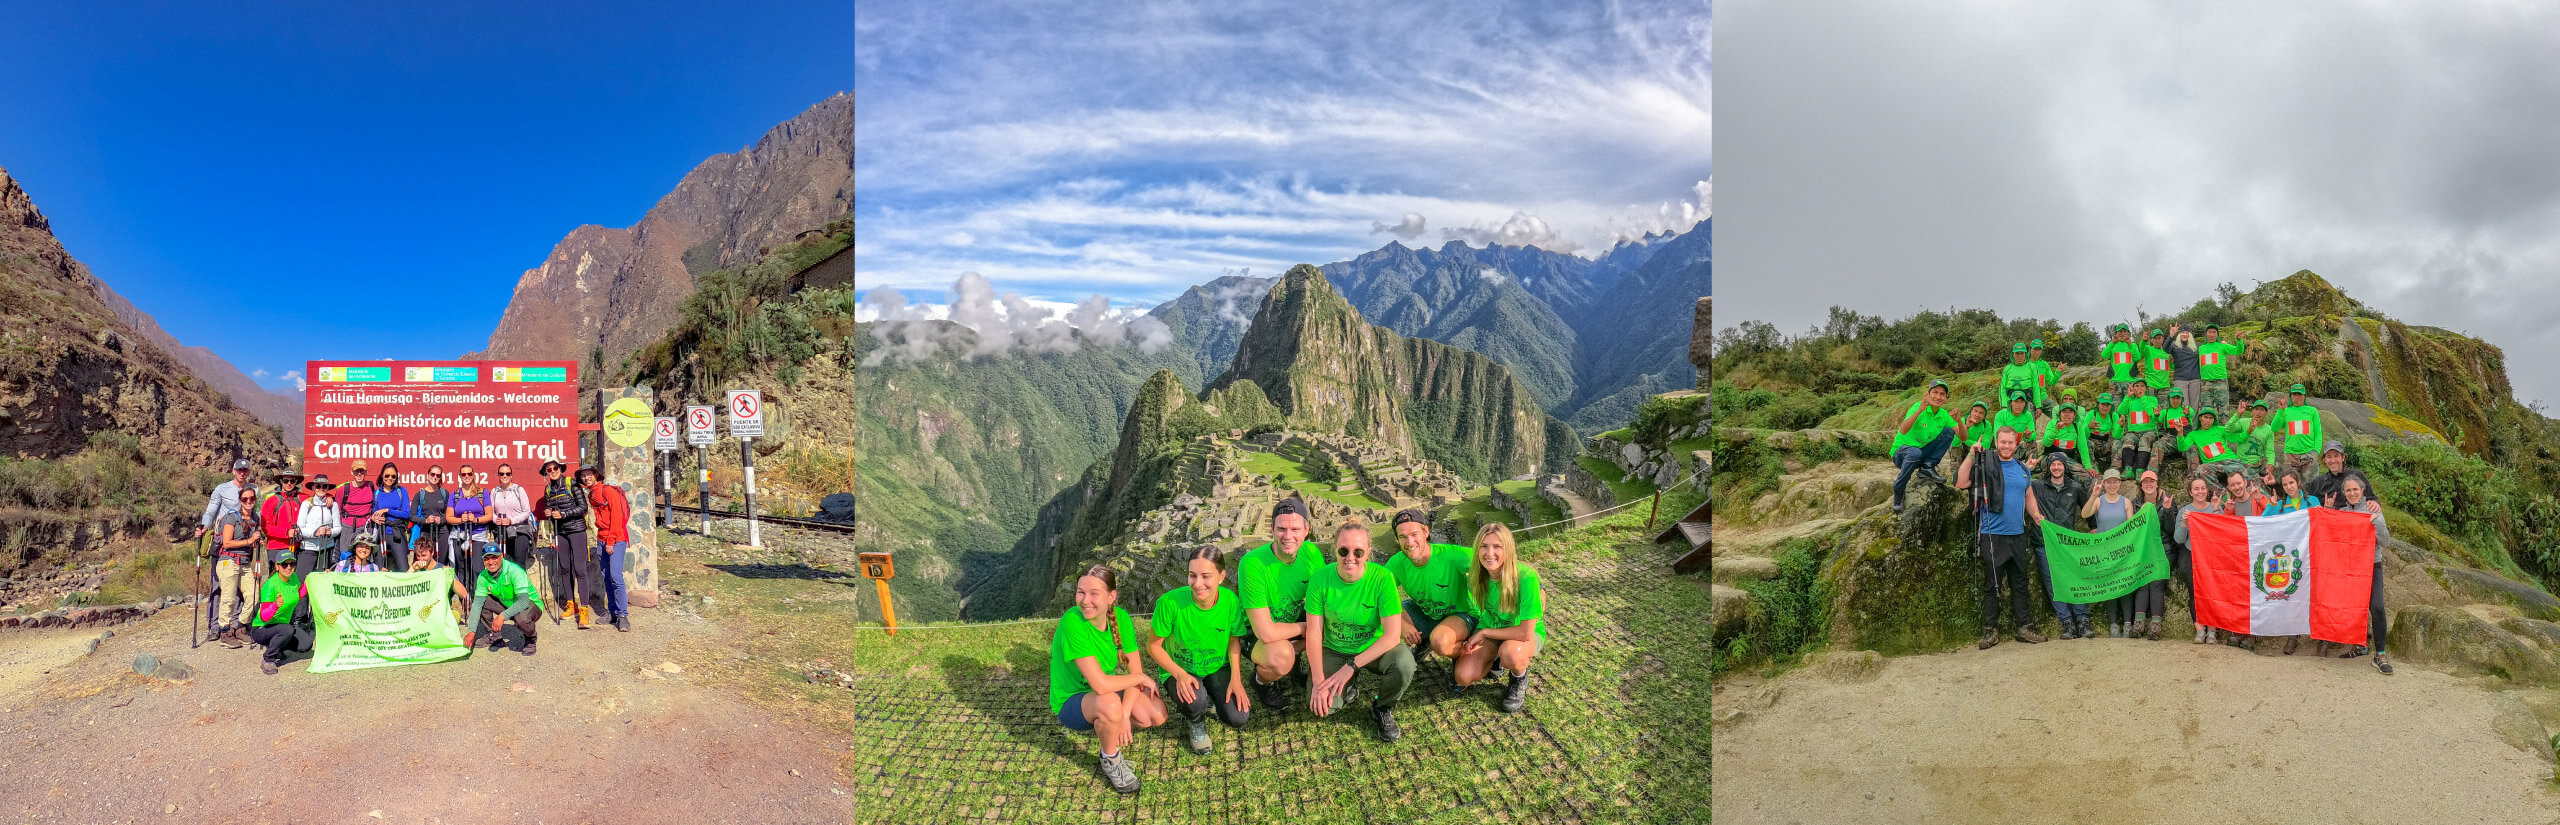 Why Book your Inca Trail Trek with Alpaca Expeditions